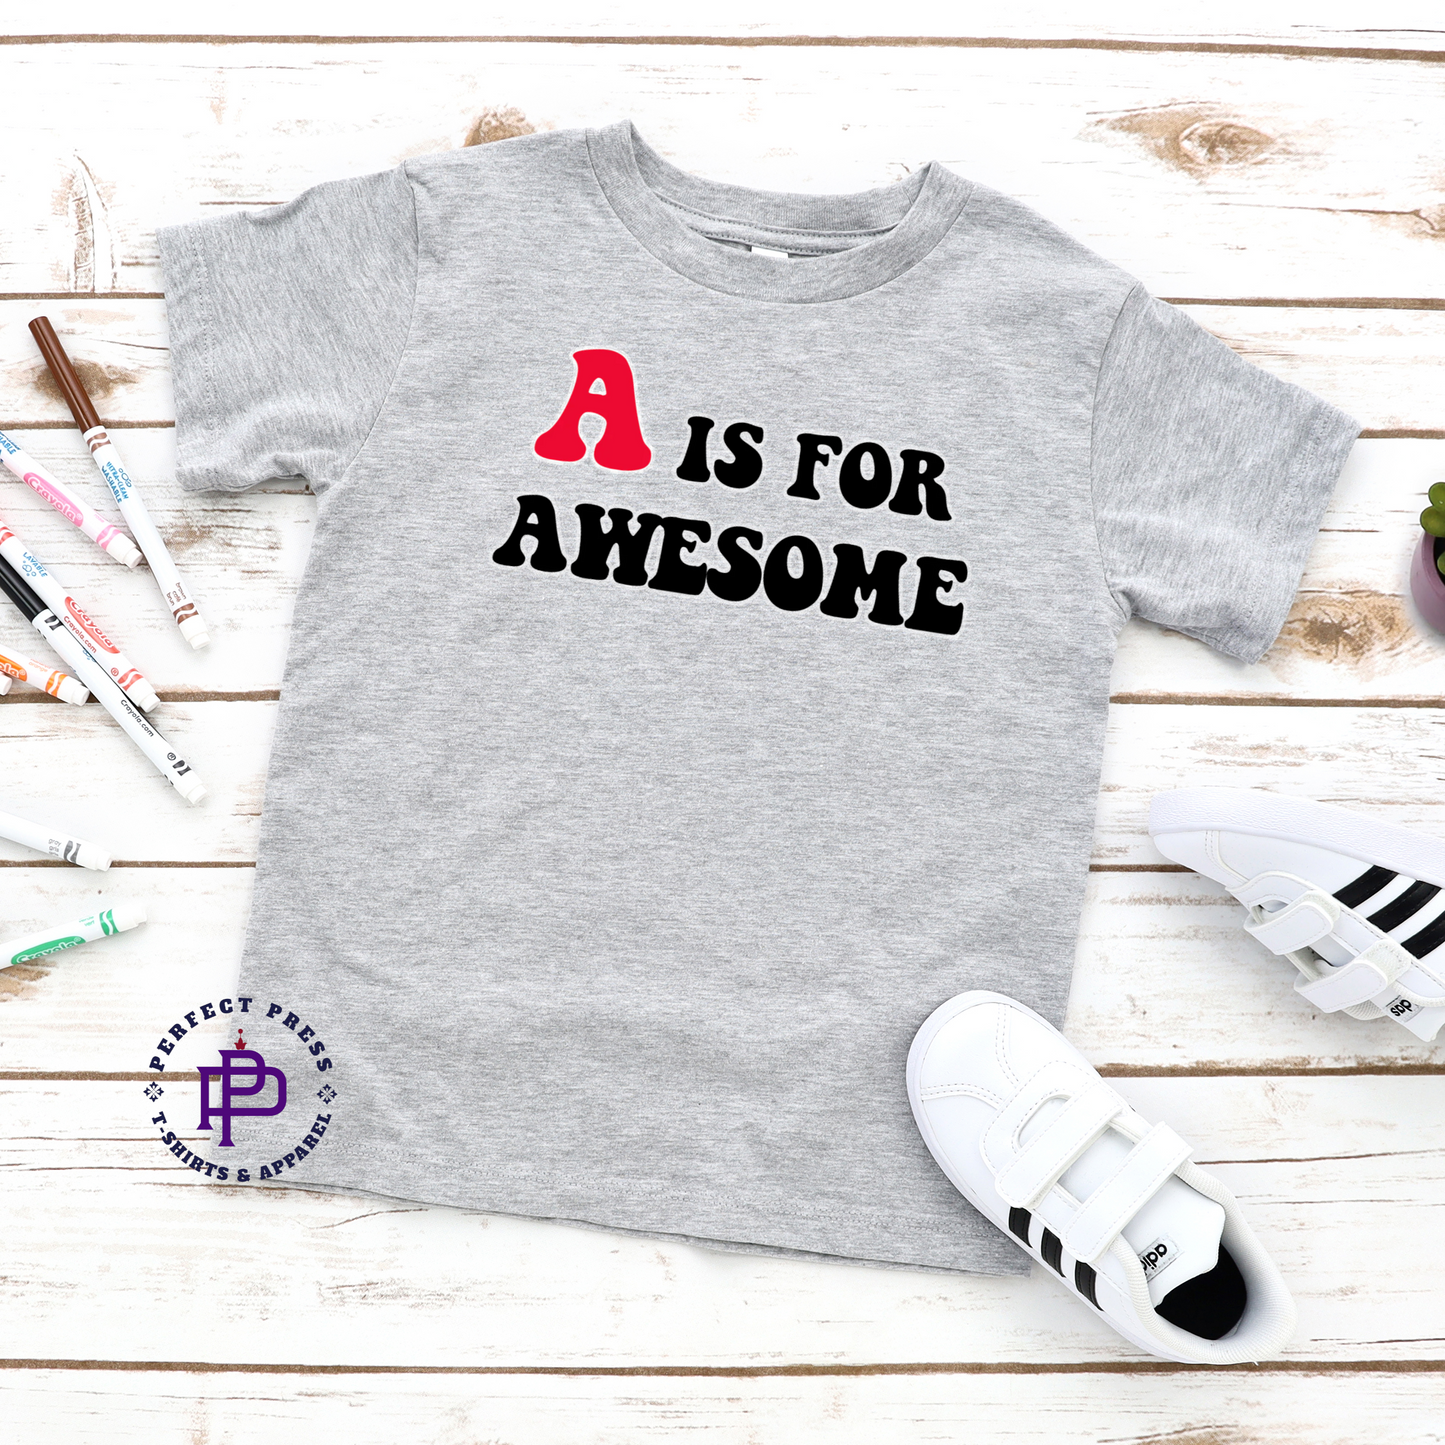 "A" IS FOR AWESOME!